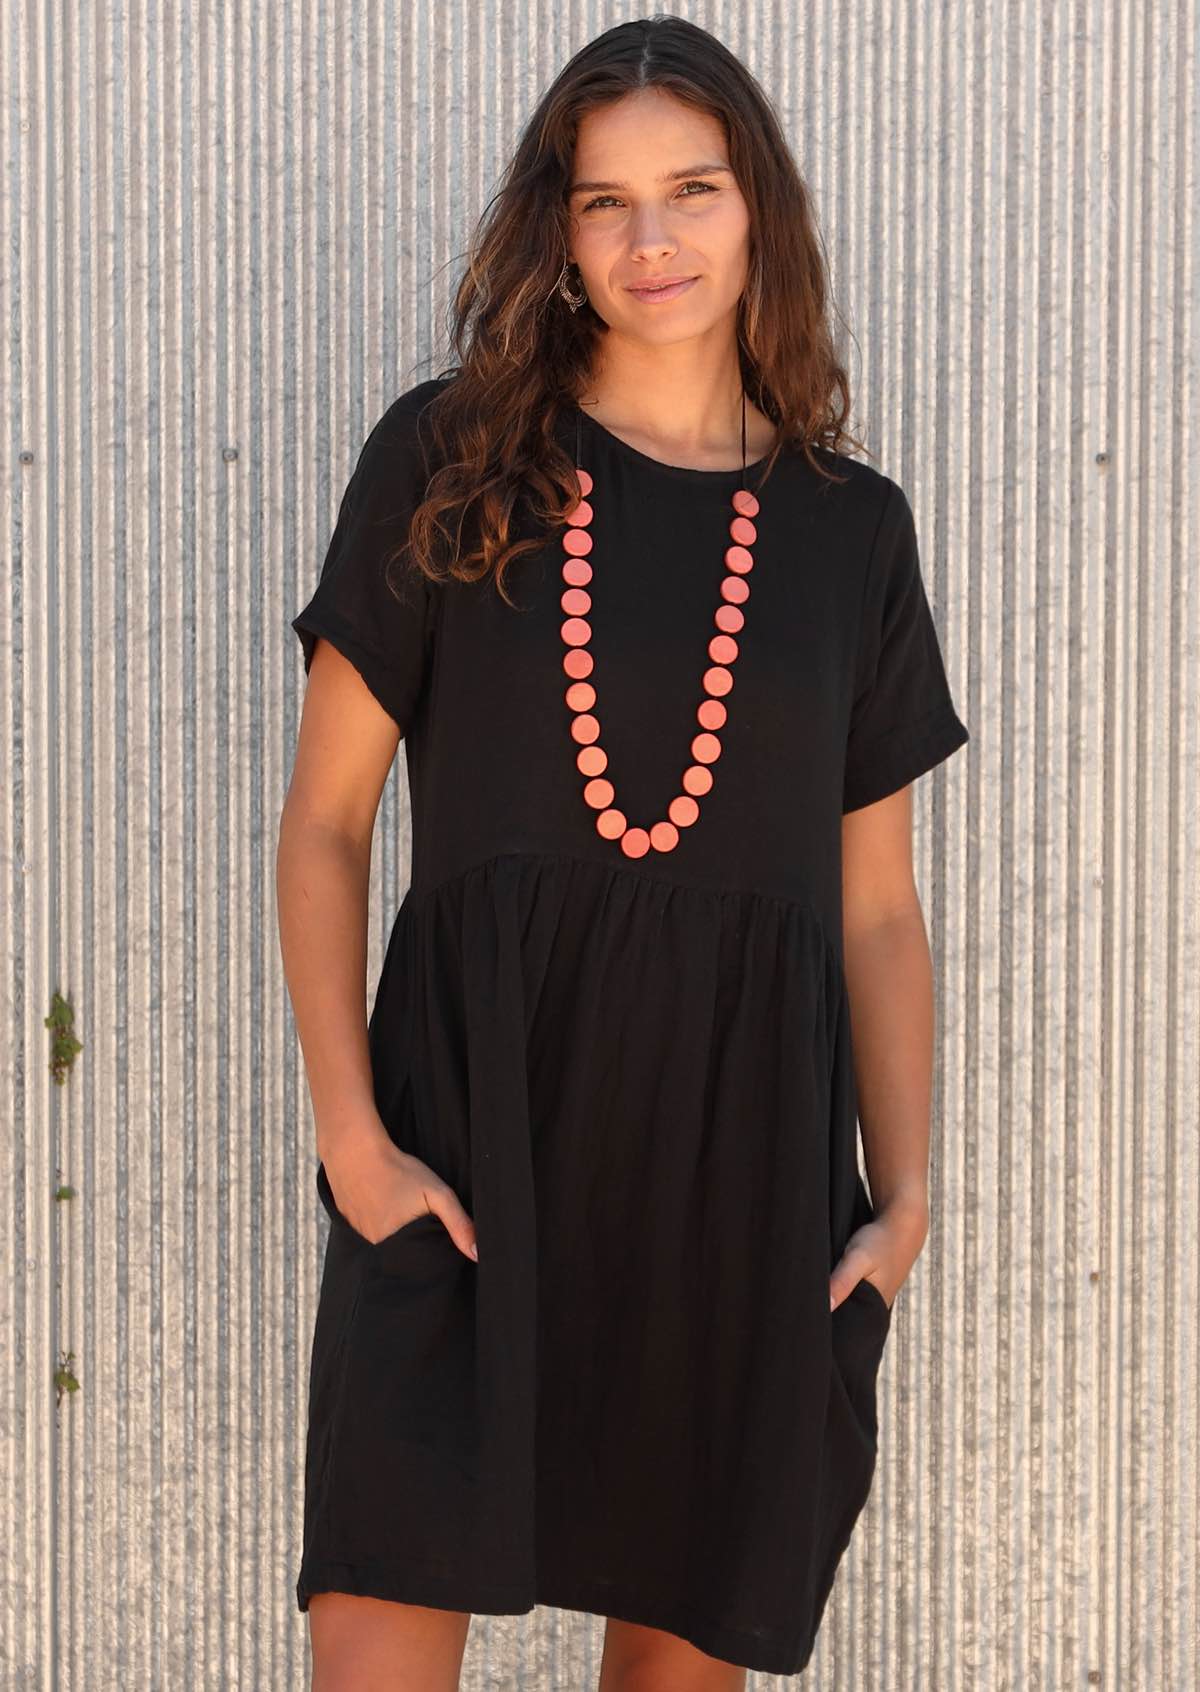 Woman wearing mabel dress short sleeve relaxed black cotton dress cotton dress gathered pleats at waistline above knee length with pockets